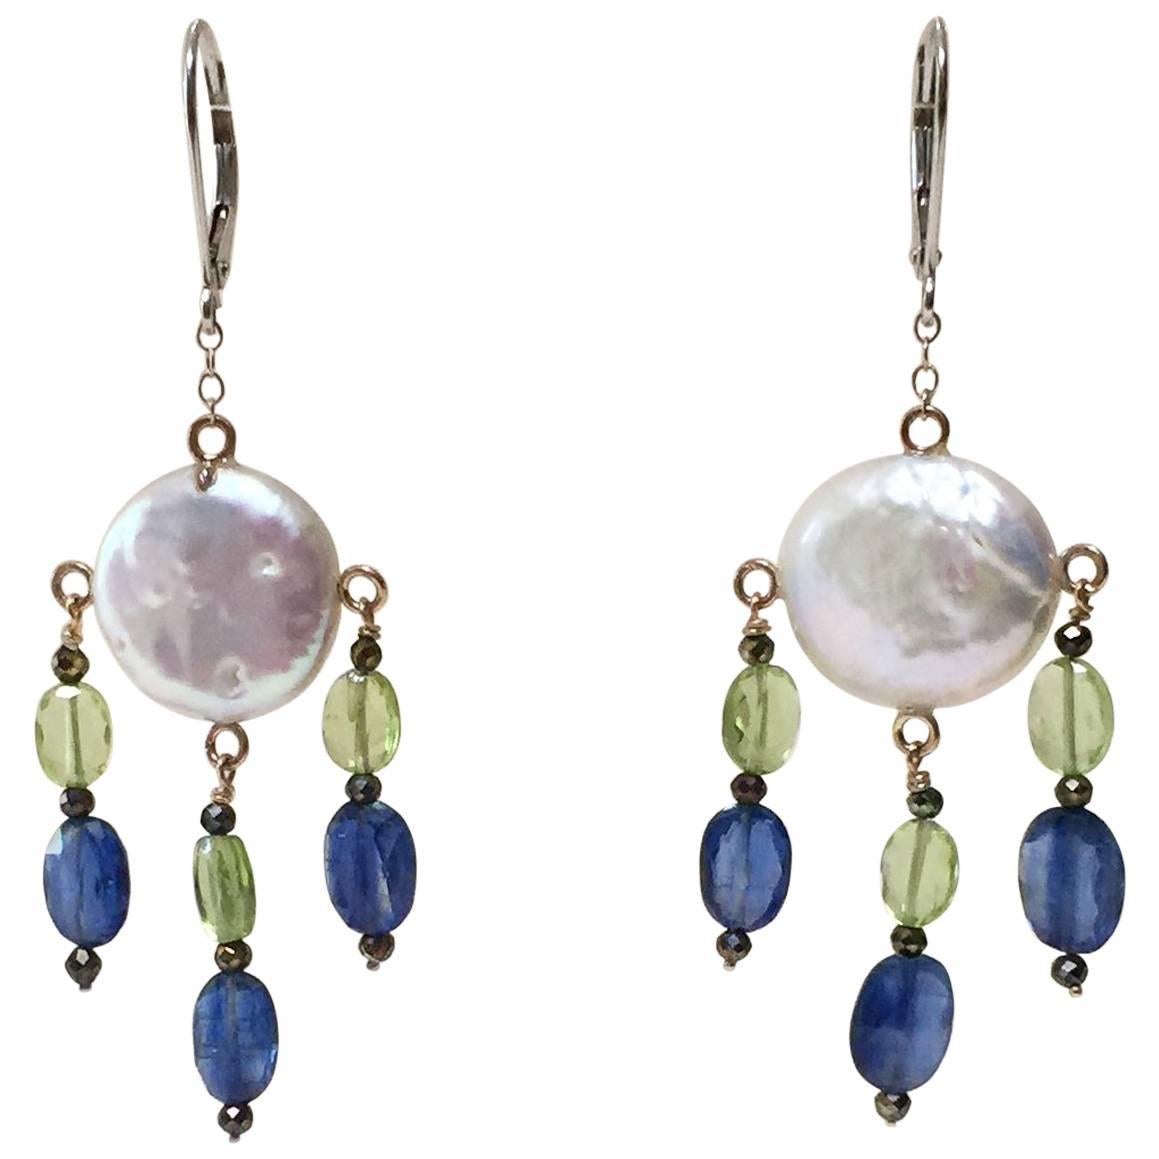 Pearl, Peridot, and Kyanite Earrings with Black Spinel and 14k Gold by Marina J